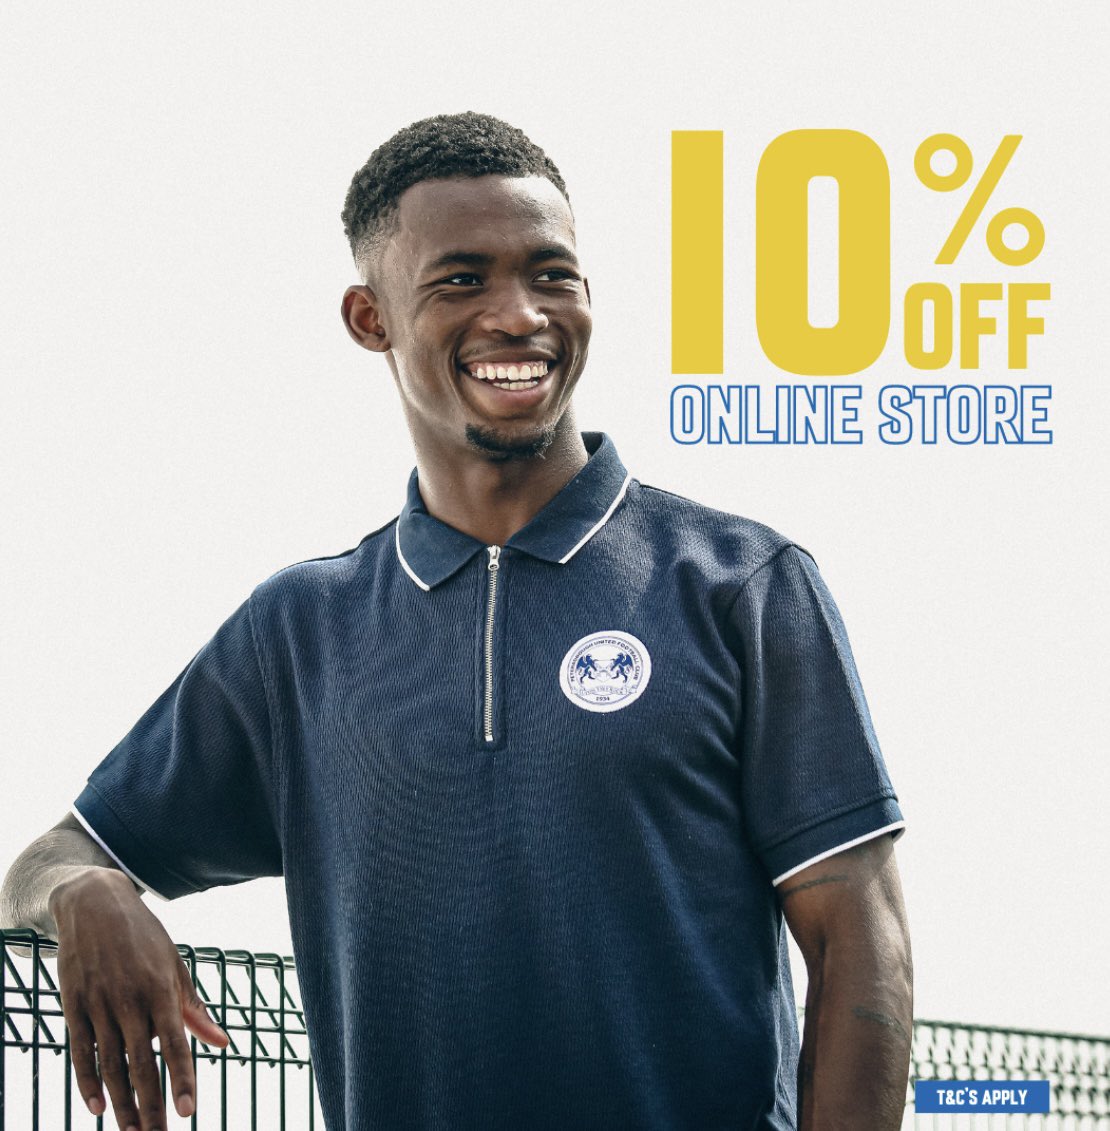 🚨 Final Reminder 🚨 All purchases online via theposhonlinestore.com will have an exclusive 10% discount applied automatically on checkout until midnight on Monday. #pufc